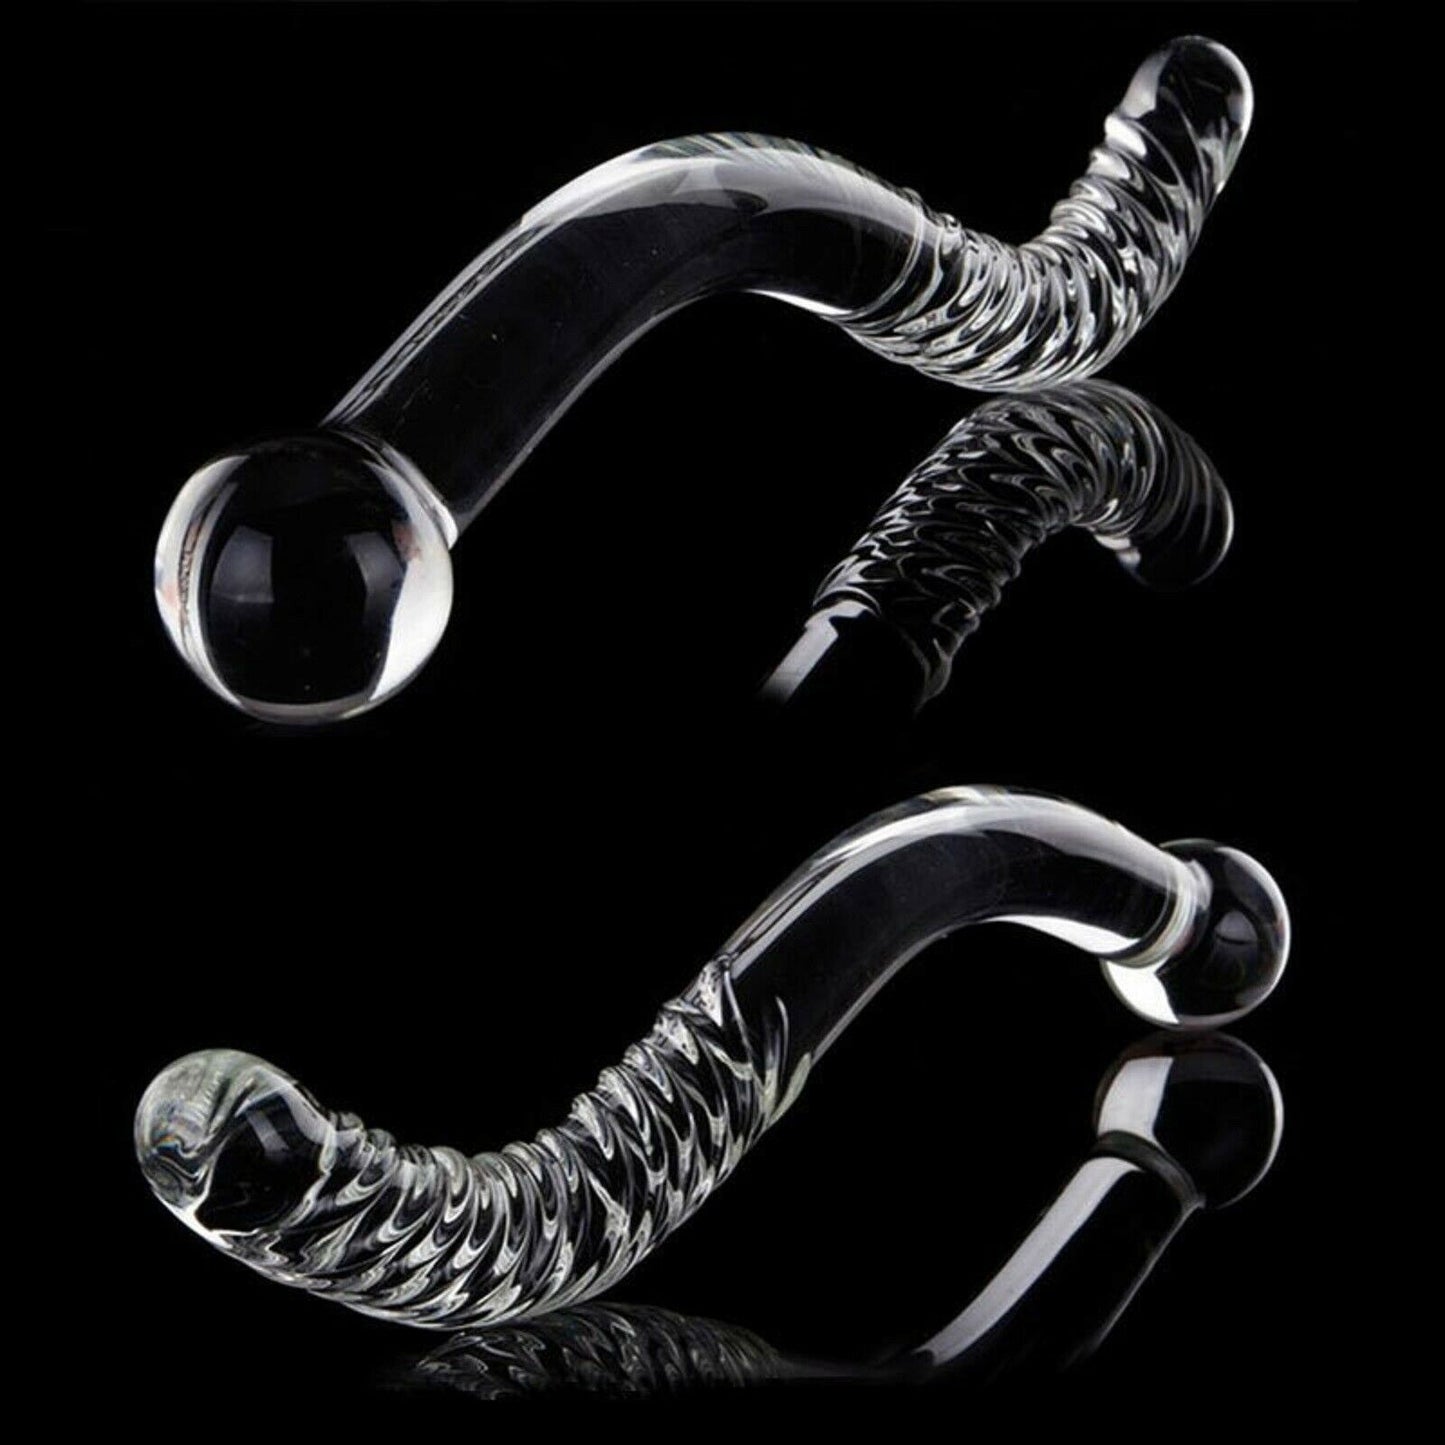 Extra Large Glass Dildo Dong Anal Chain Plug Prostate Massager Thruster Sex Toy